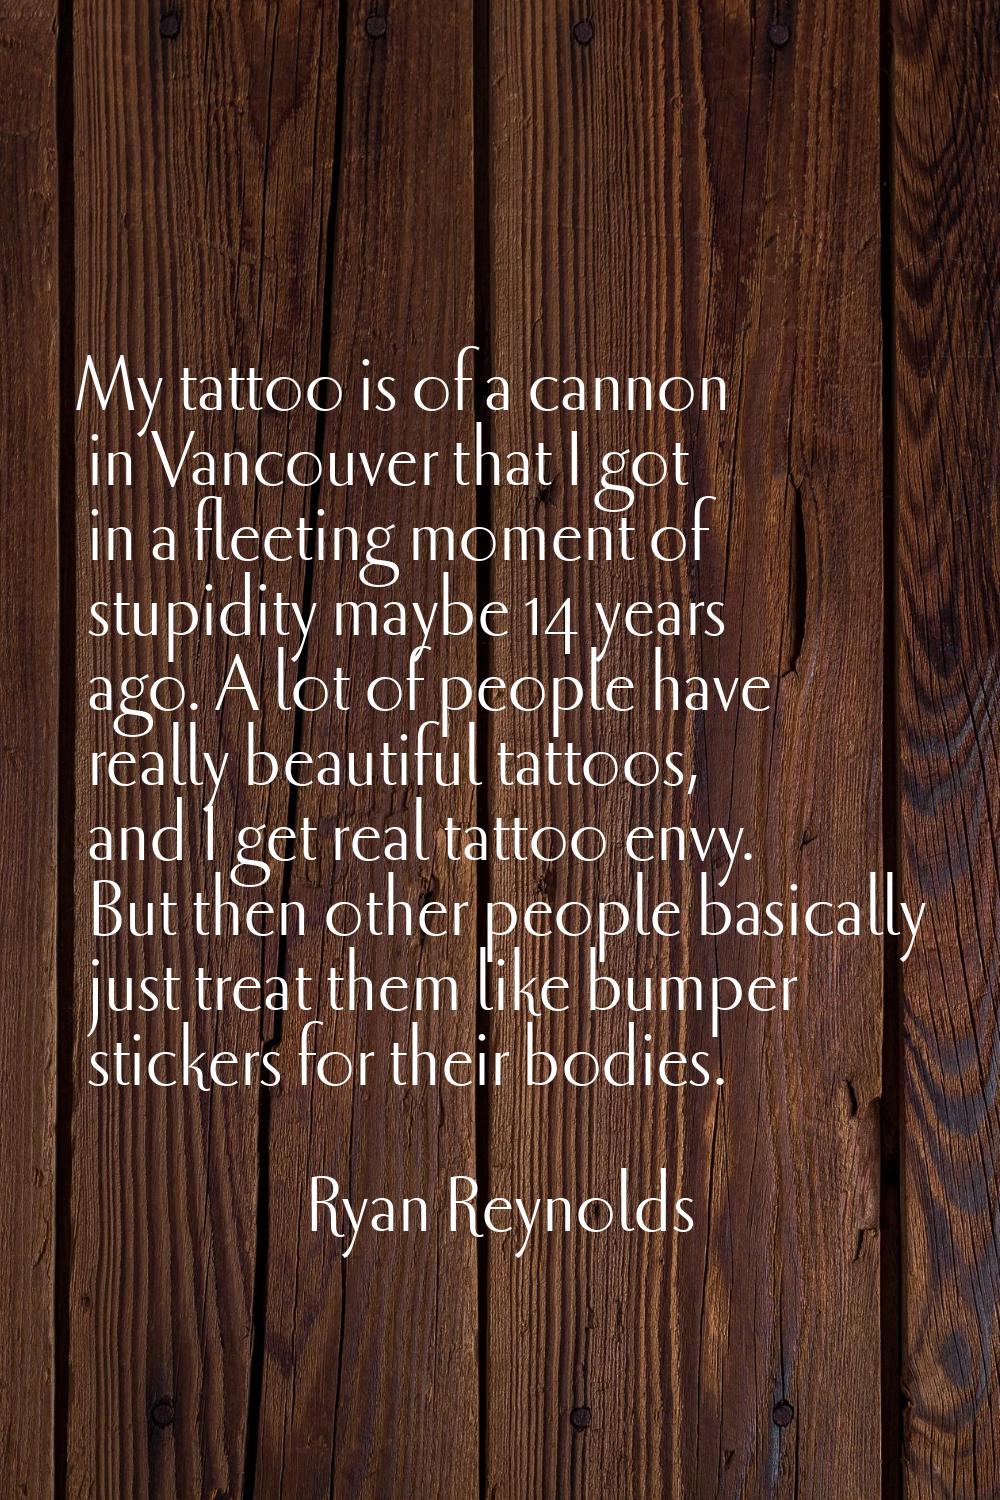 My tattoo is of a cannon in Vancouver that I got in a fleeting moment of stupidity maybe 14 years a